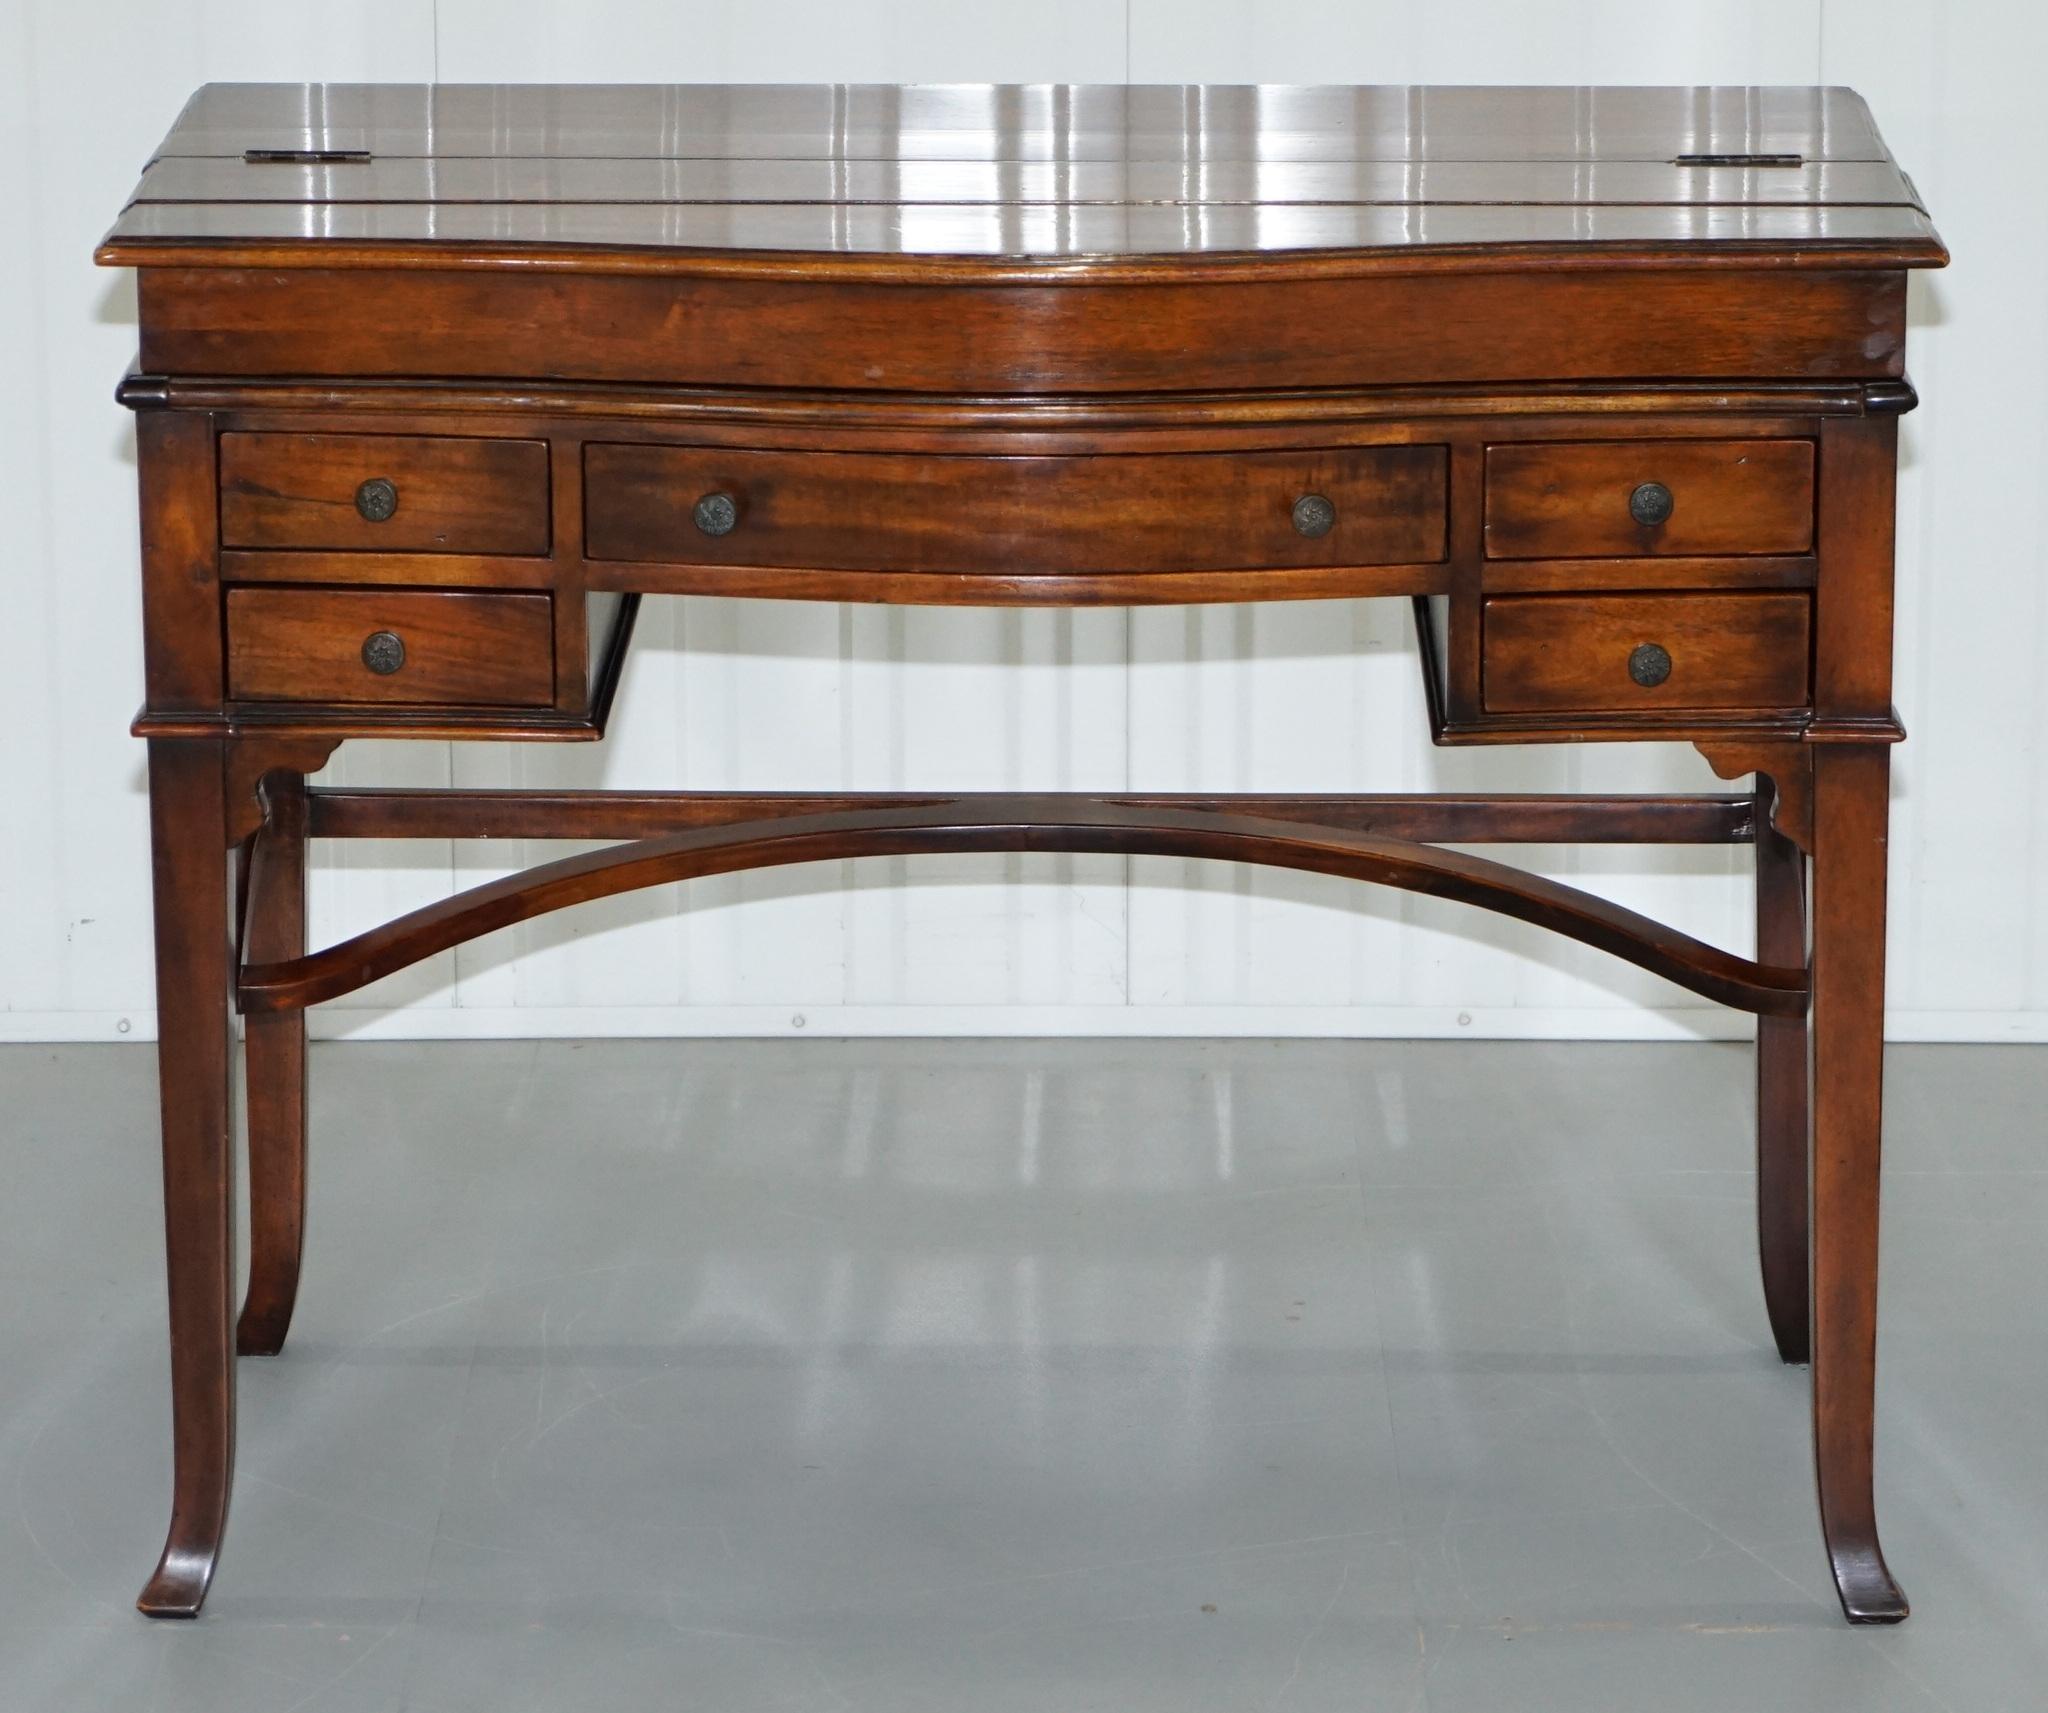 We are delighted to this absolutely stunning Theodore Alexander The Residency fold-out writing table/desk RRP £2000

A truly exquisite piece, as it stands it’s a very usable writing table that’s highly decorative with a lovely timber patina,